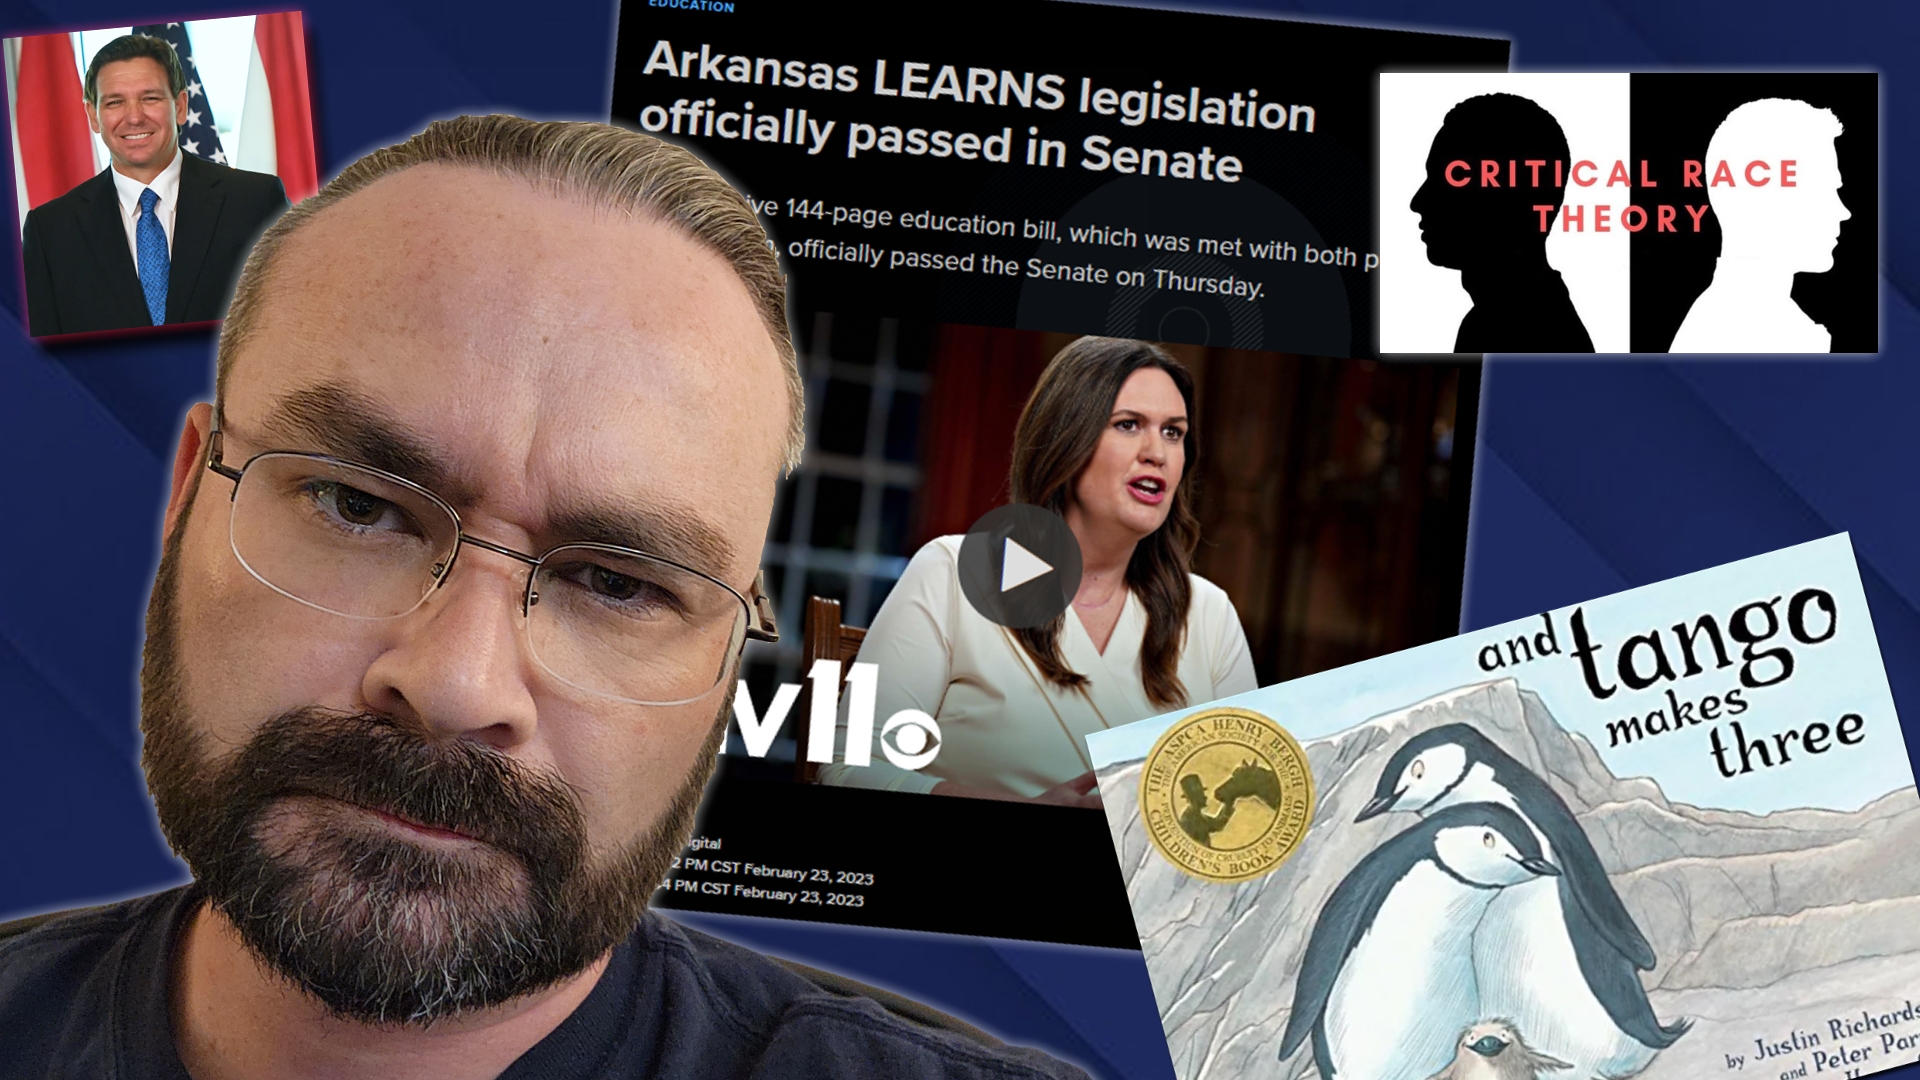 The Correct-Wing War on Education – Arkansas Joins the Fight